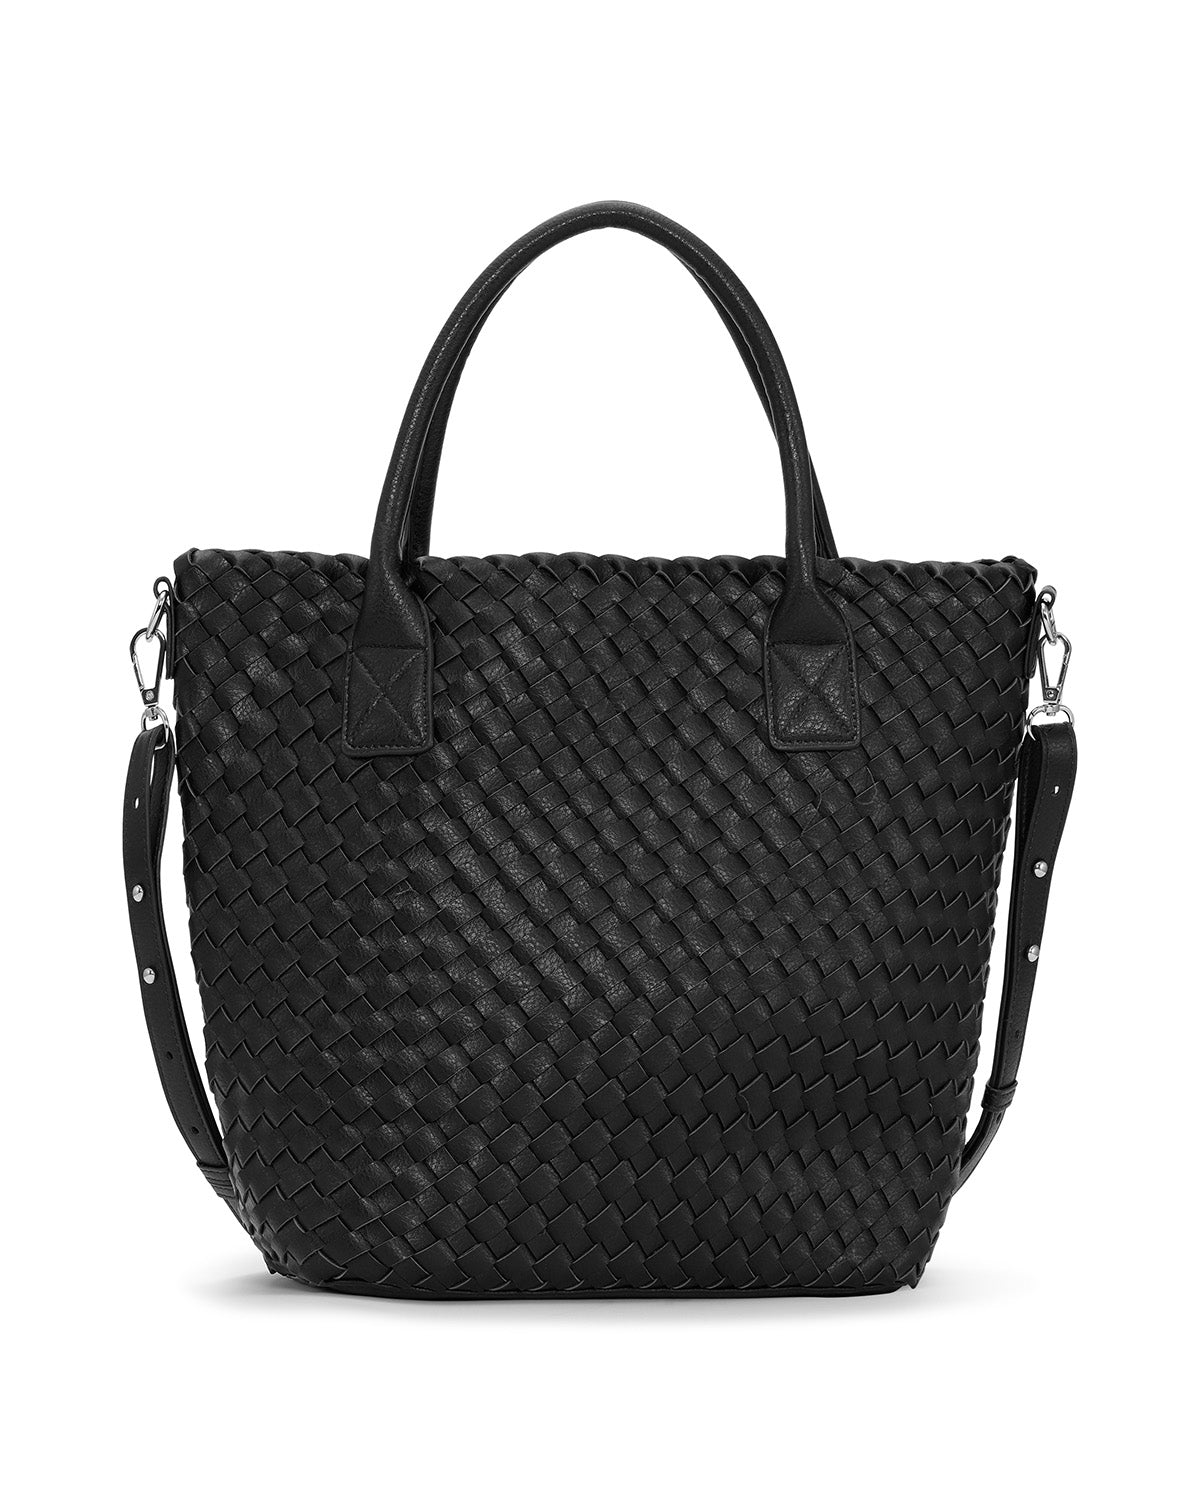 Tote bag in color black by Ilse Jacobsen